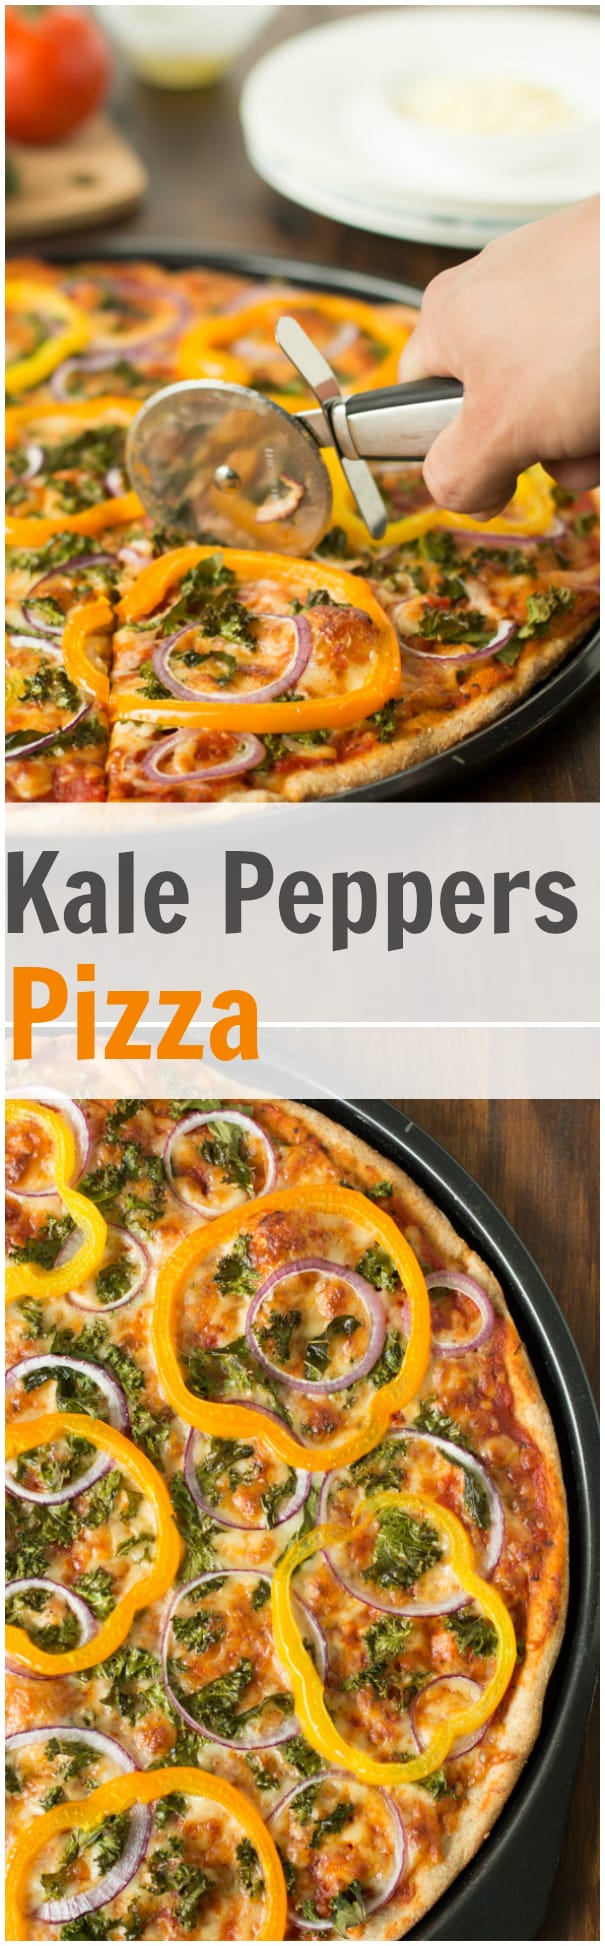 Kale Peppers Pizza